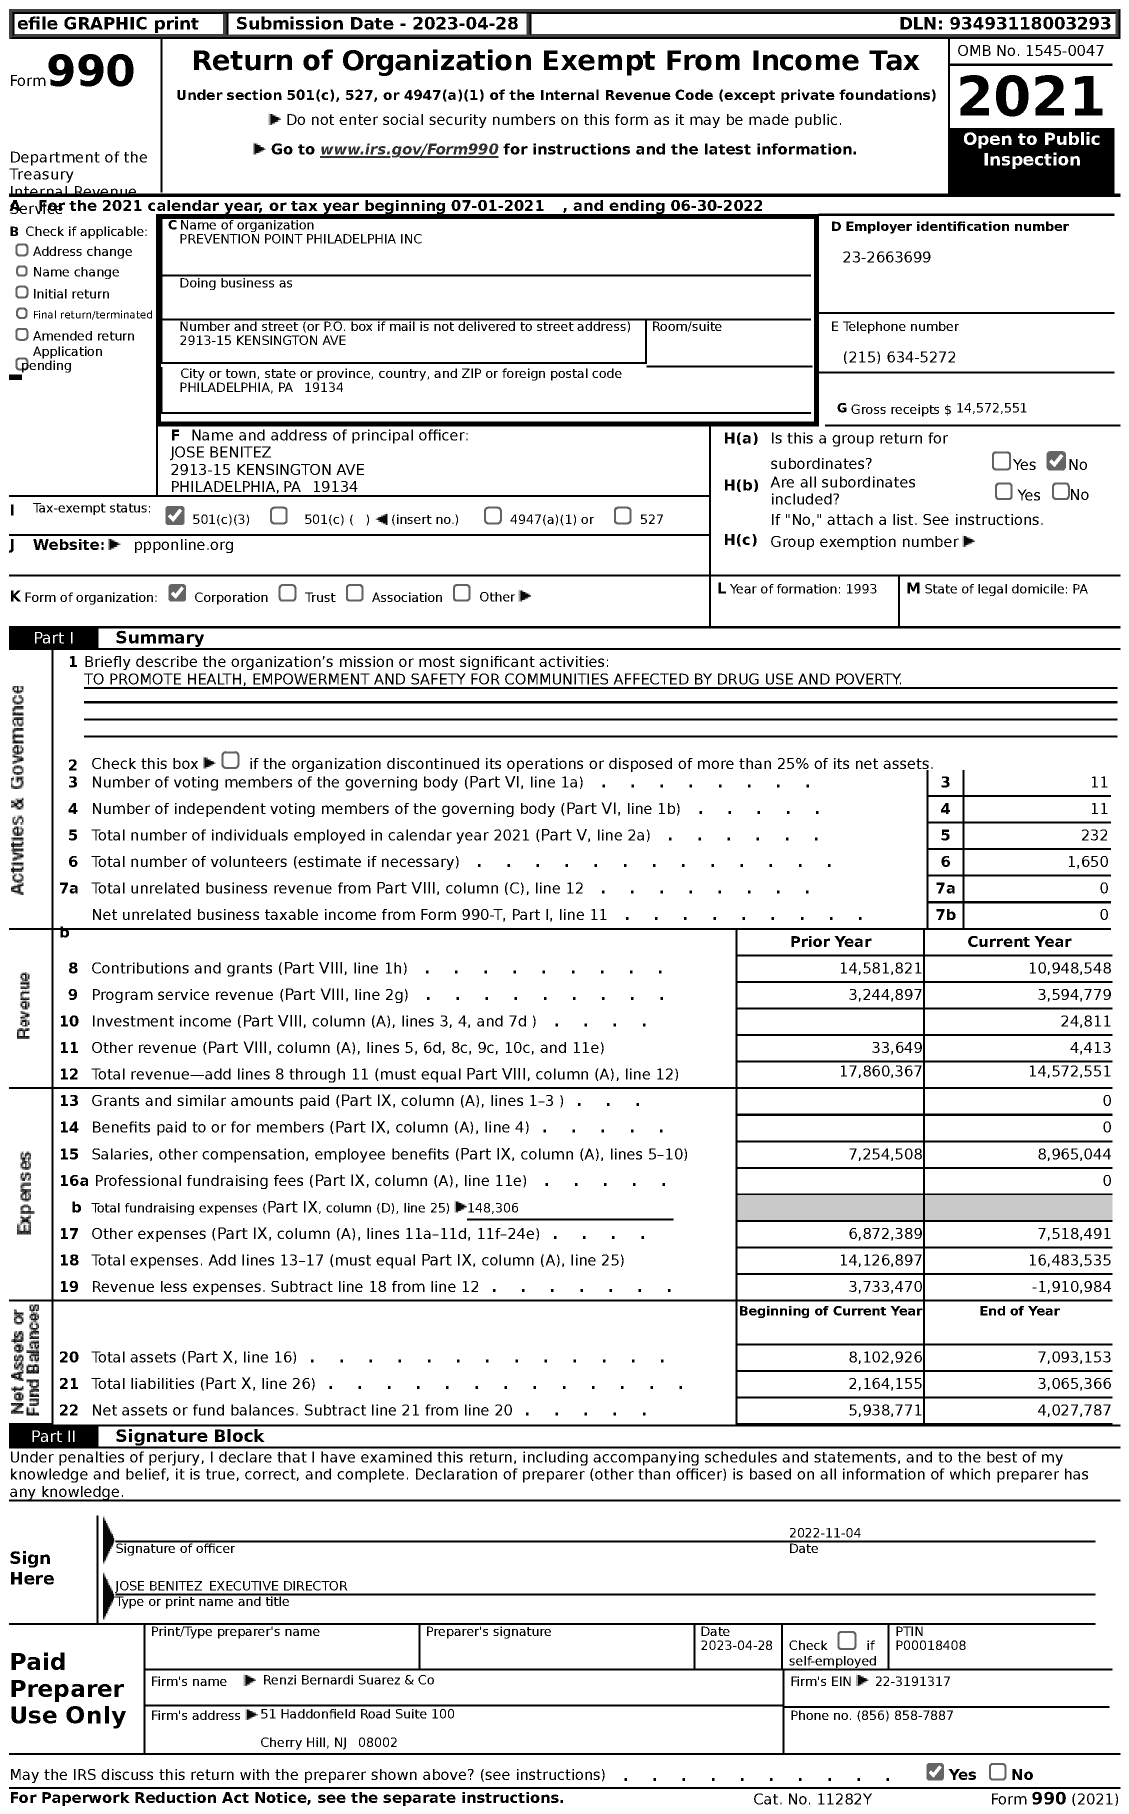 Image of first page of 2021 Form 990 for Prevention Point Philadelphia (PPP)